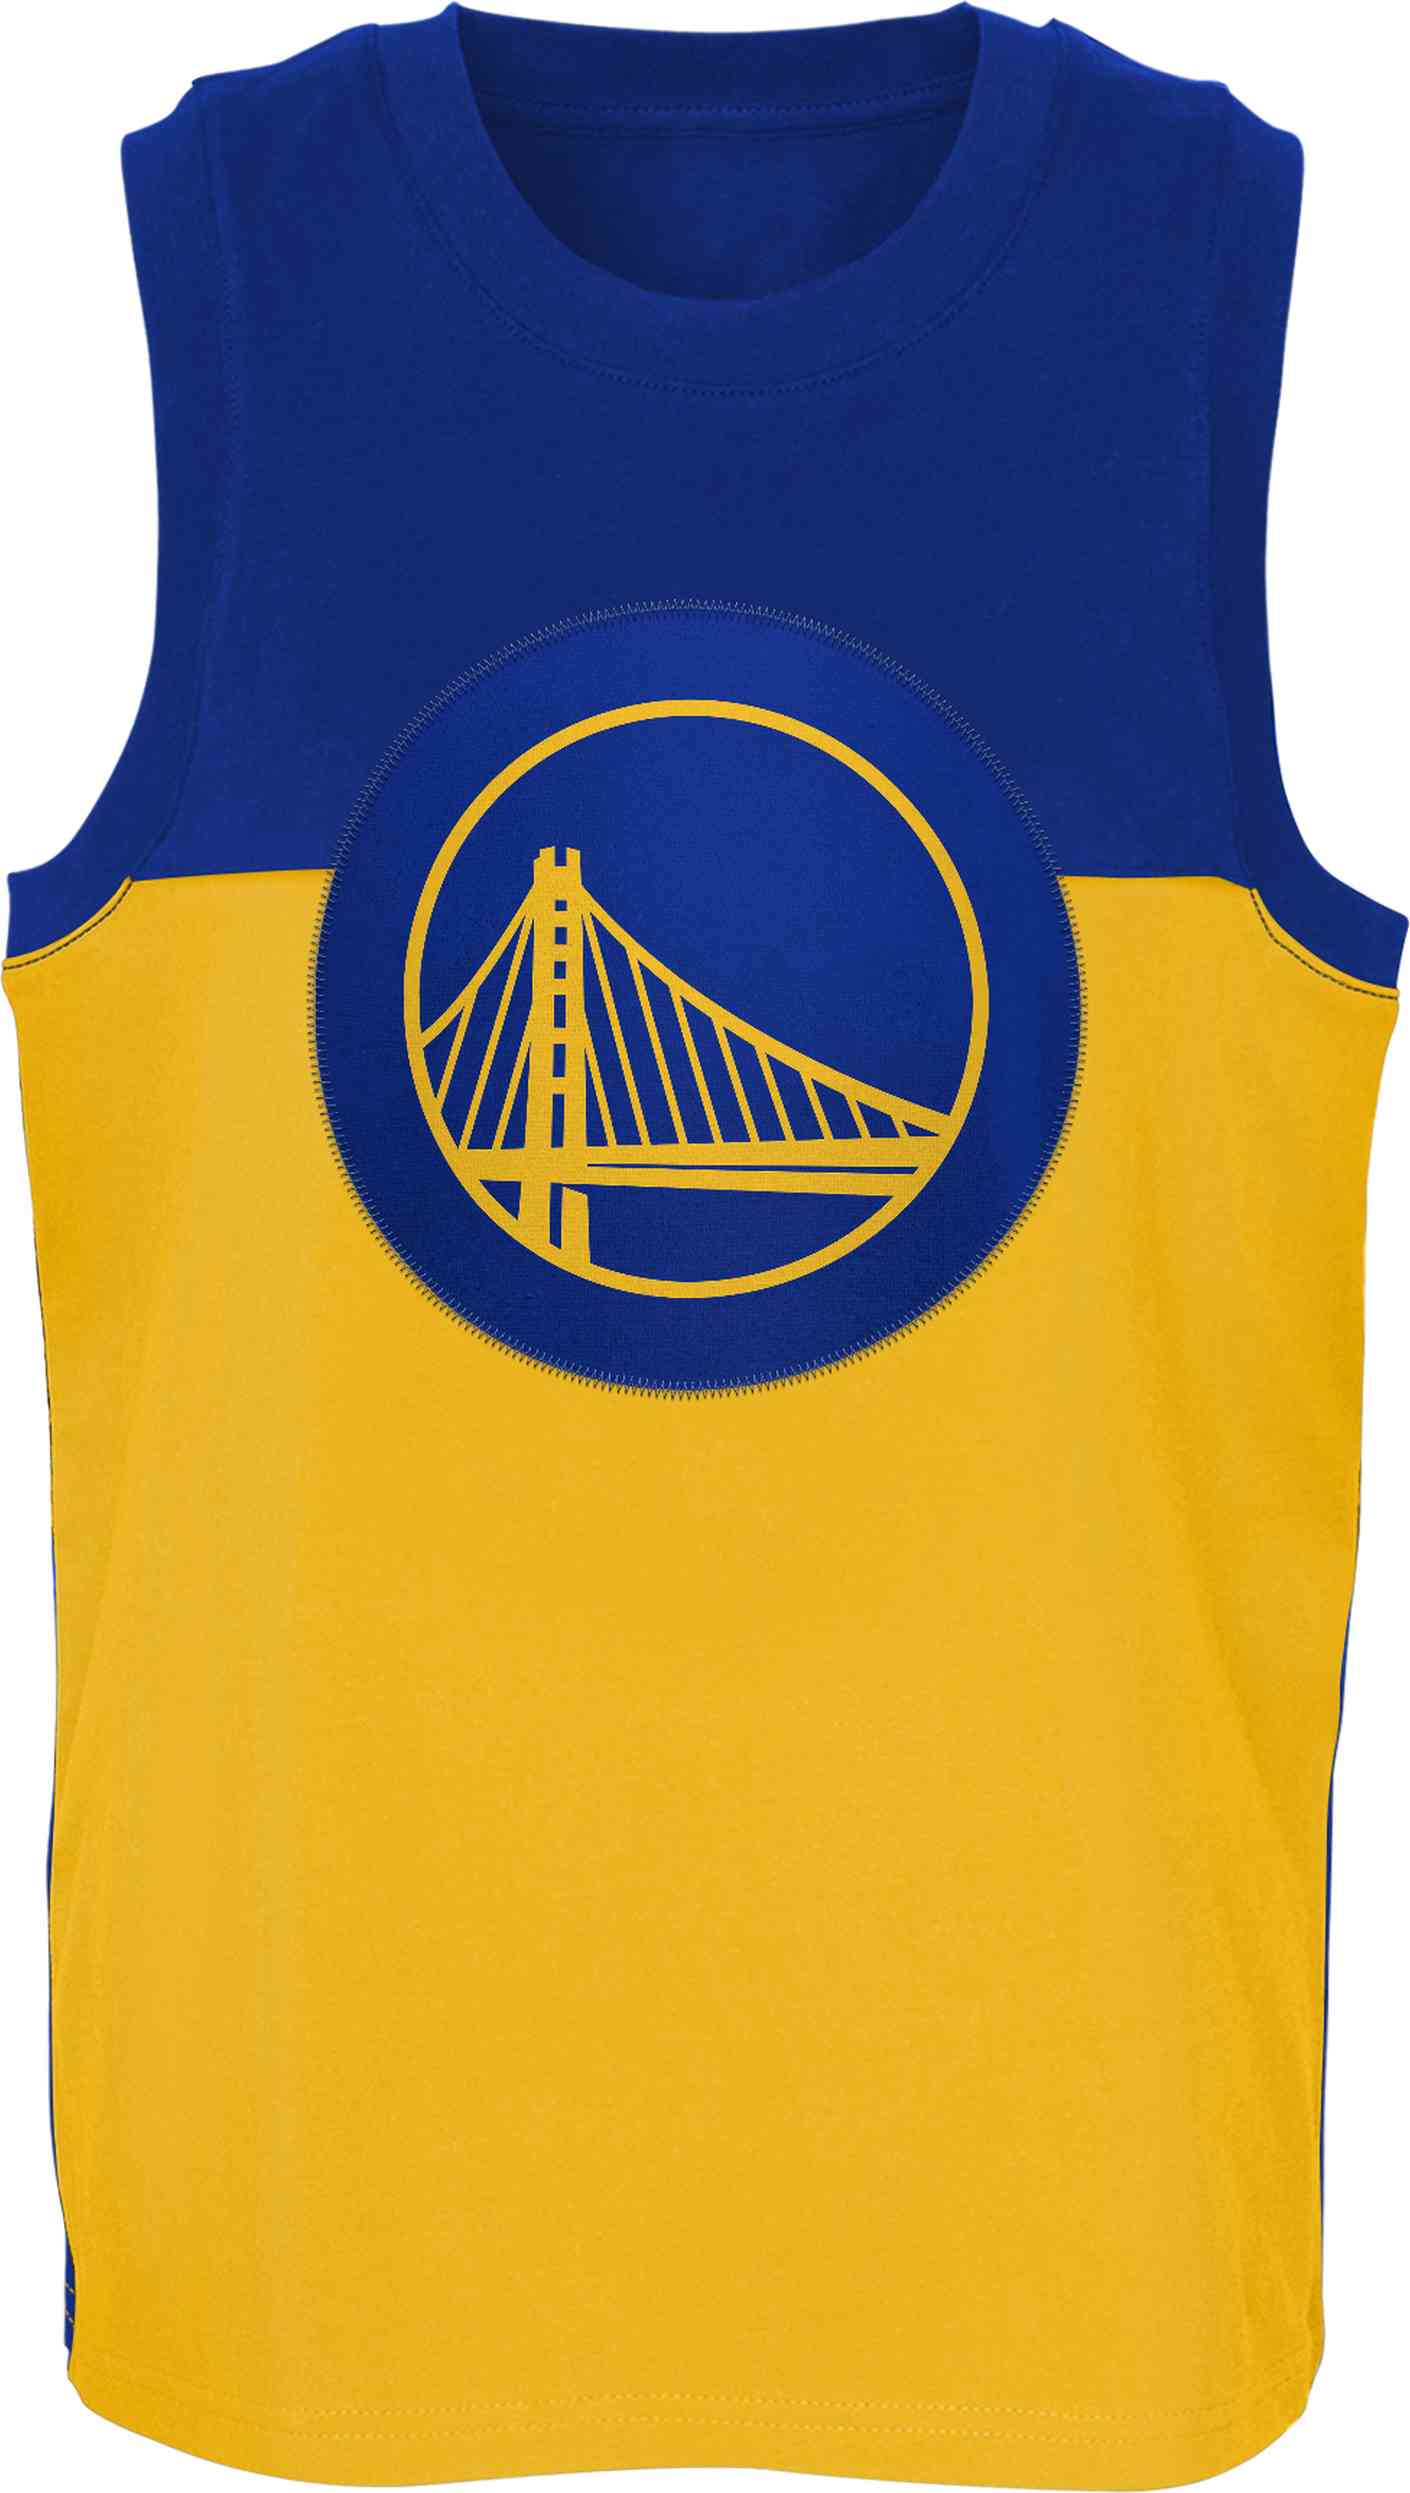 Outerstuff - NBA Golden State Warriors Revitalize Curry Tank Top